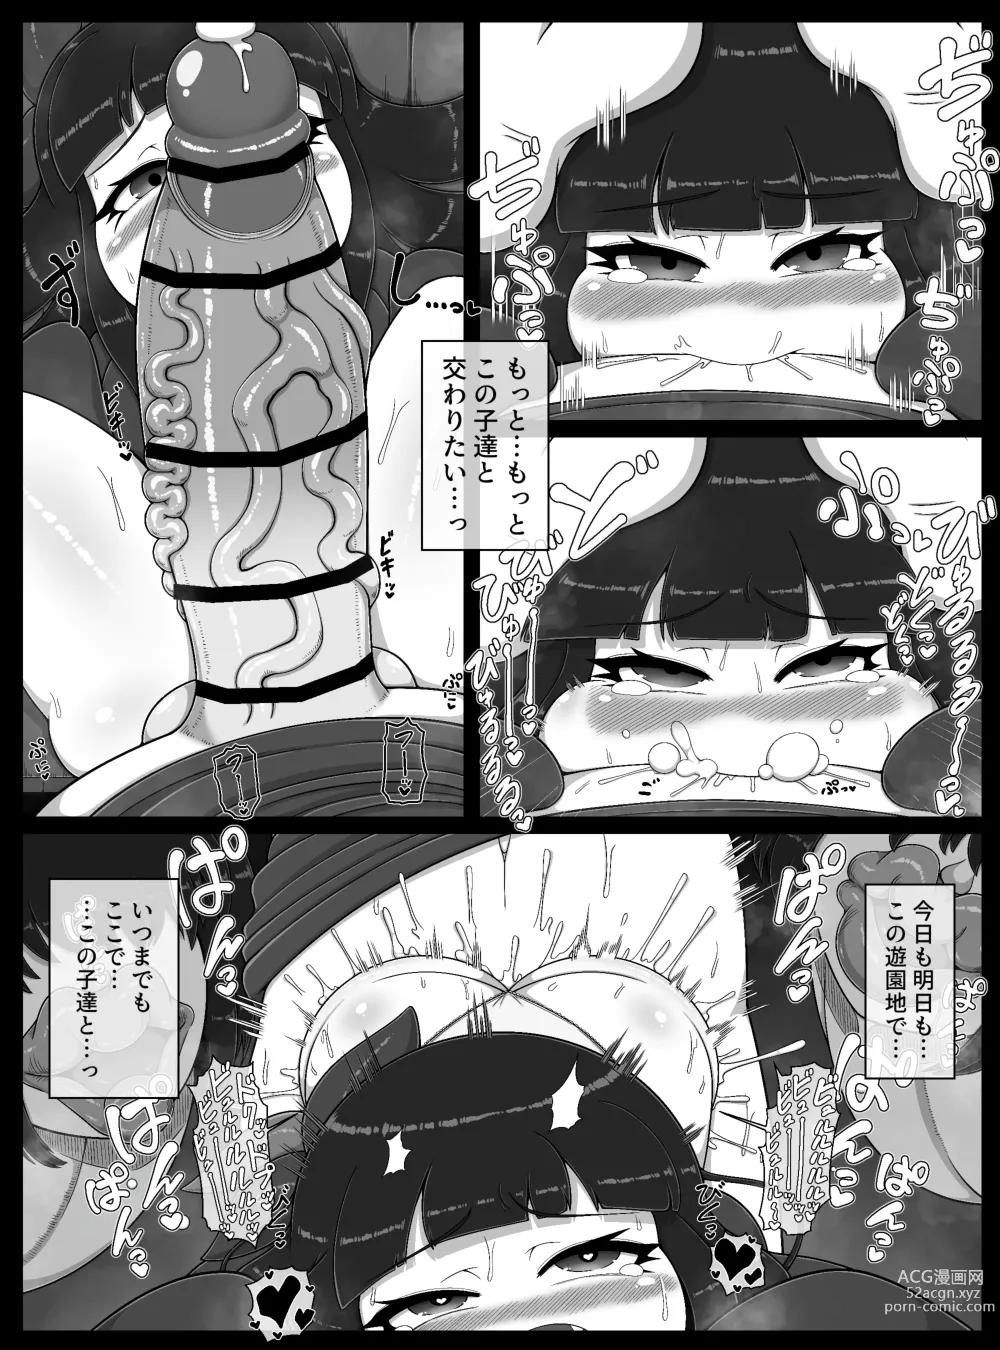 Page 24 of doujinshi Monster House 2